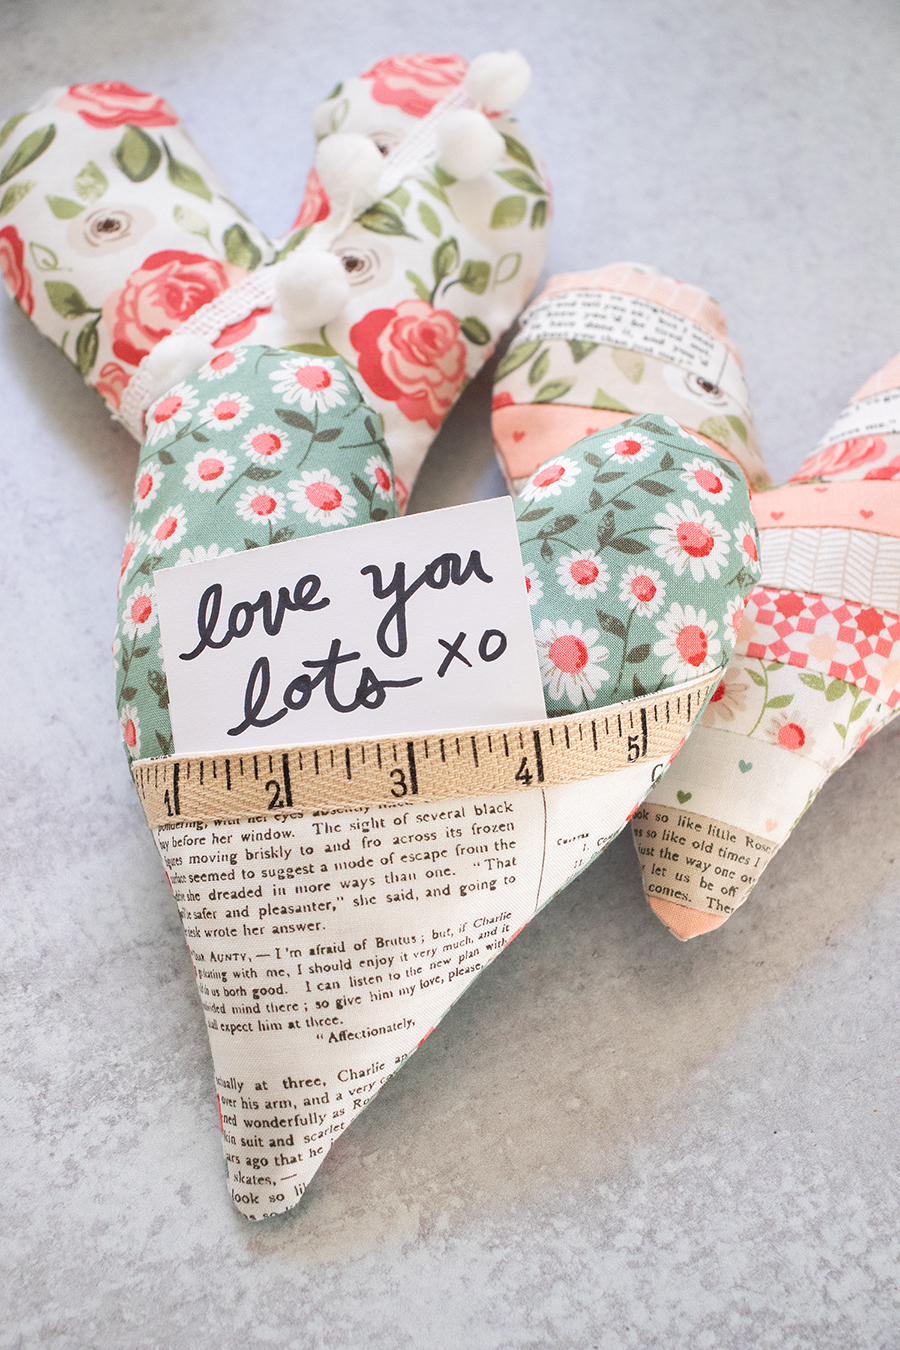 My Funky Valentines - FREE stuffed heart pattern from Lella Boutique. Fabric is Love Note by Lella Boutique for Moda Fabrics. Download the free pattern here.